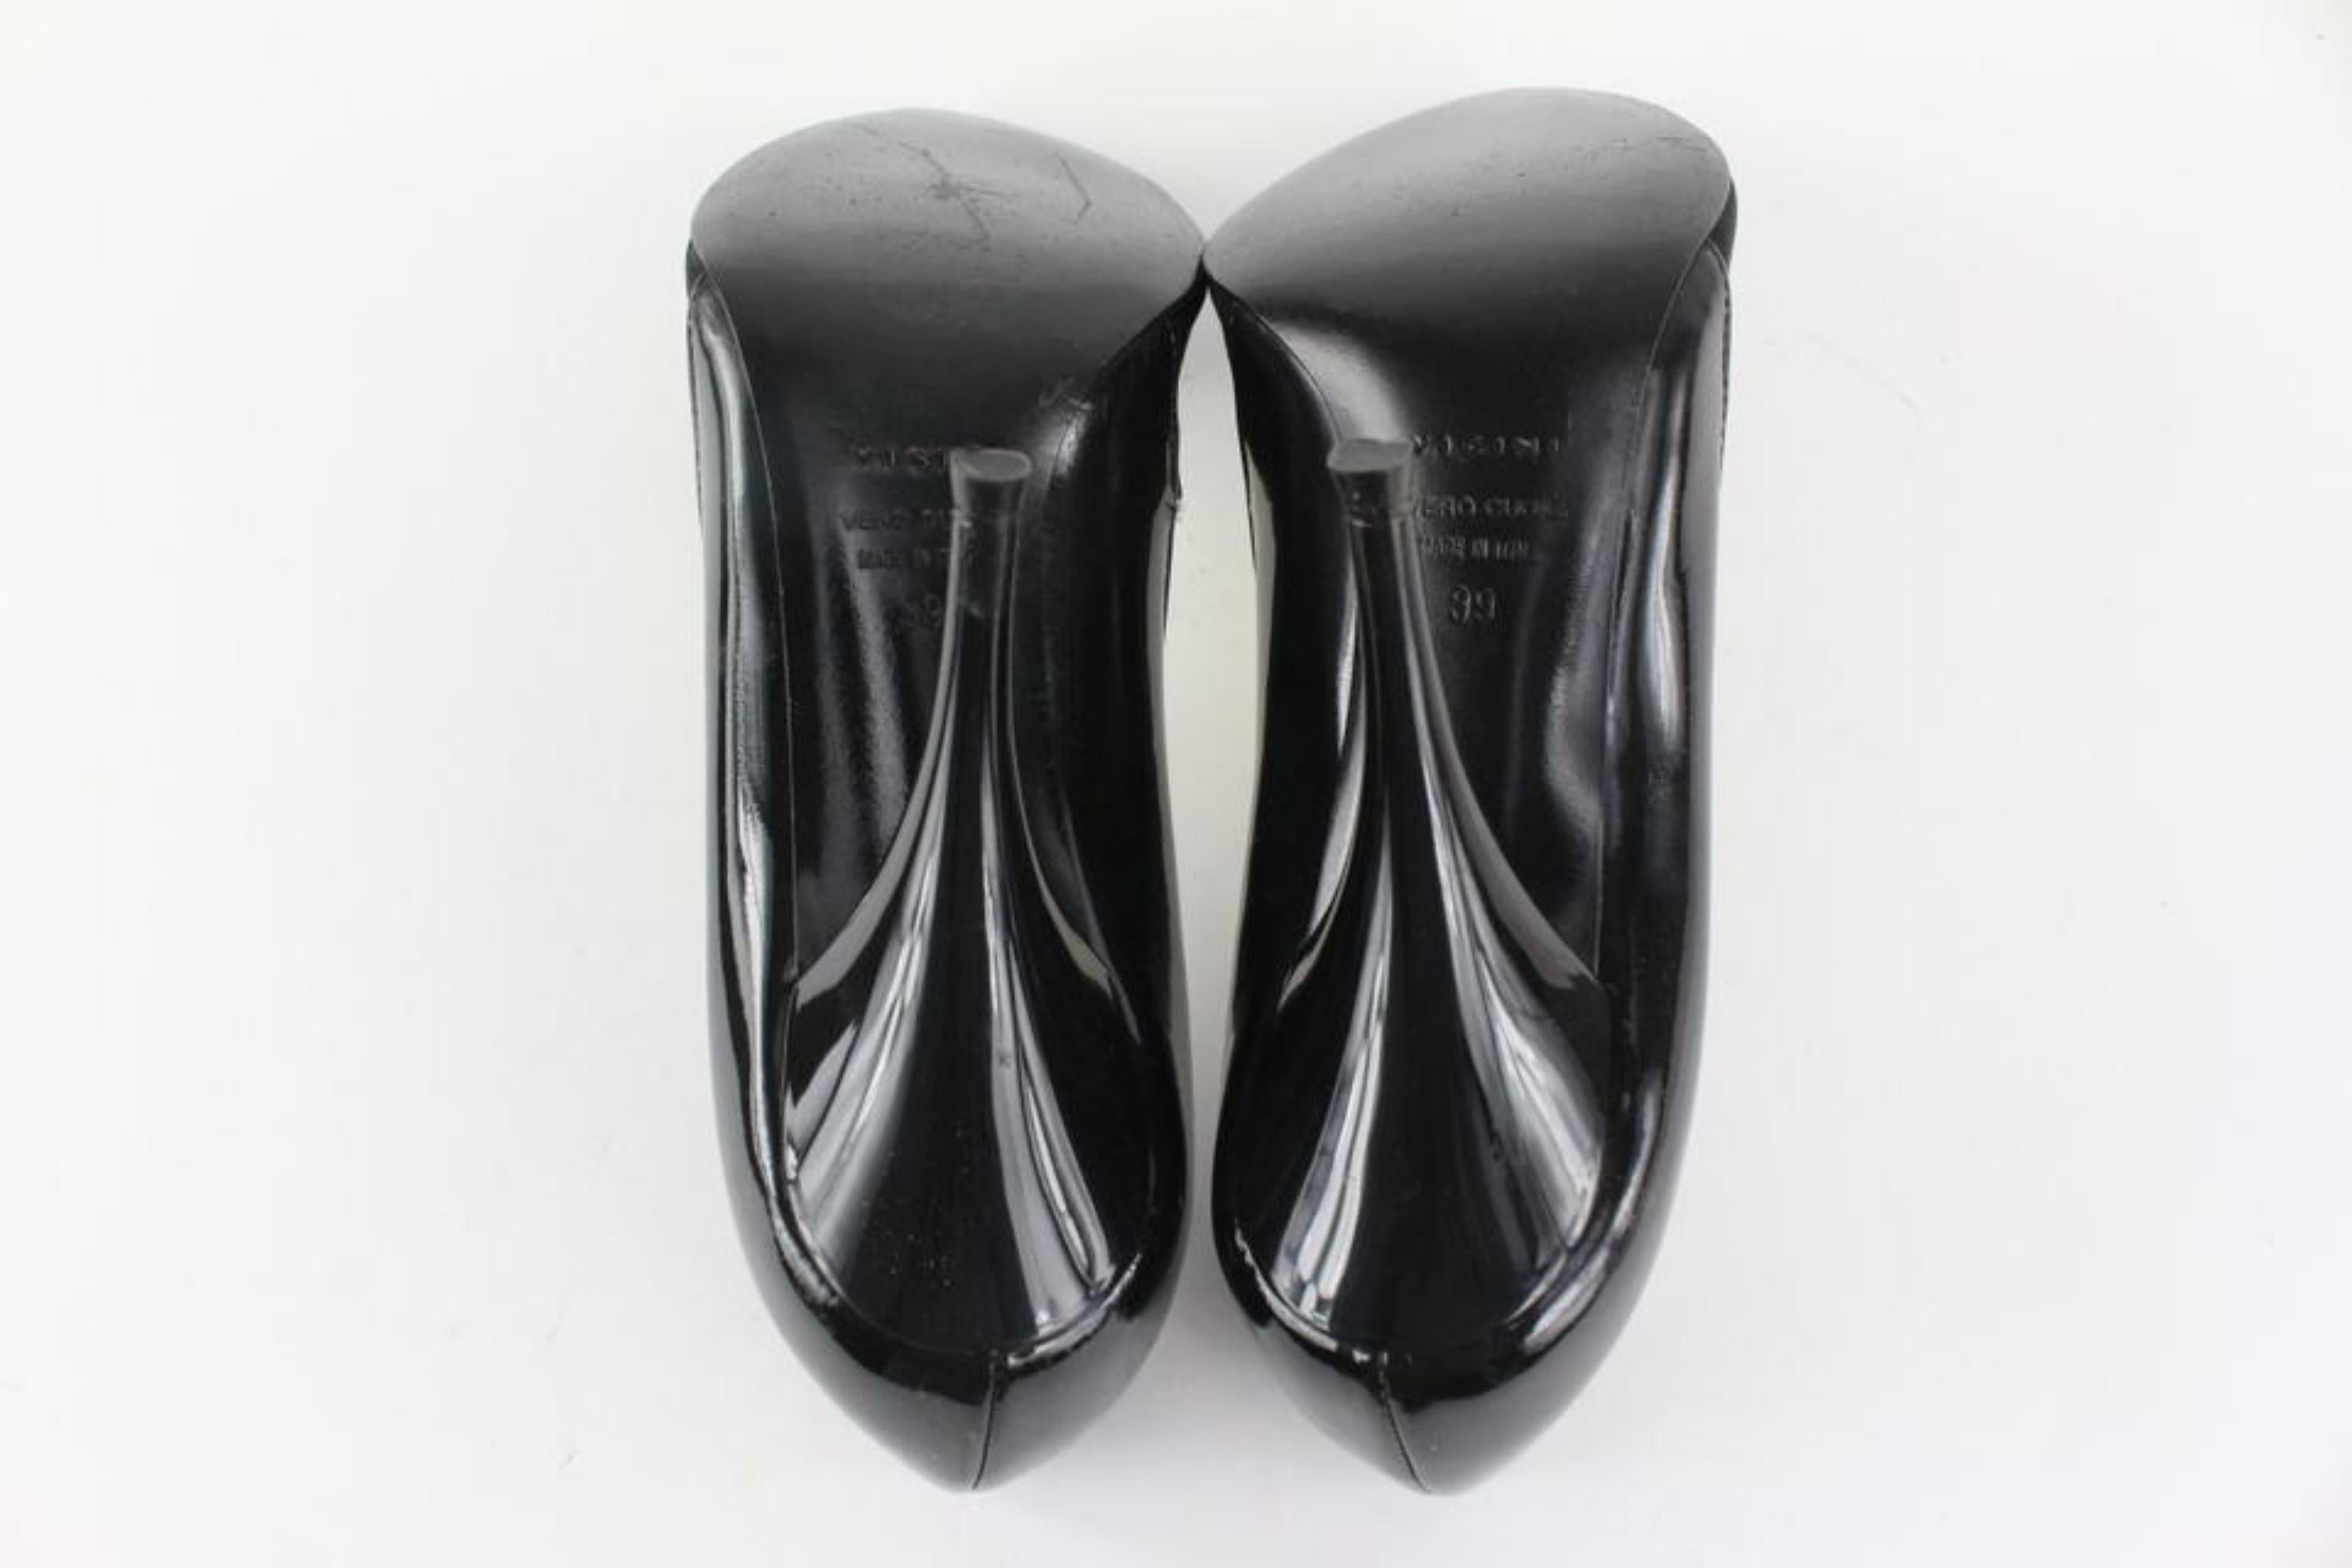 Vicini Size 39 Black Patent x Satin Pump Heels 2V1209 In Good Condition For Sale In Dix hills, NY